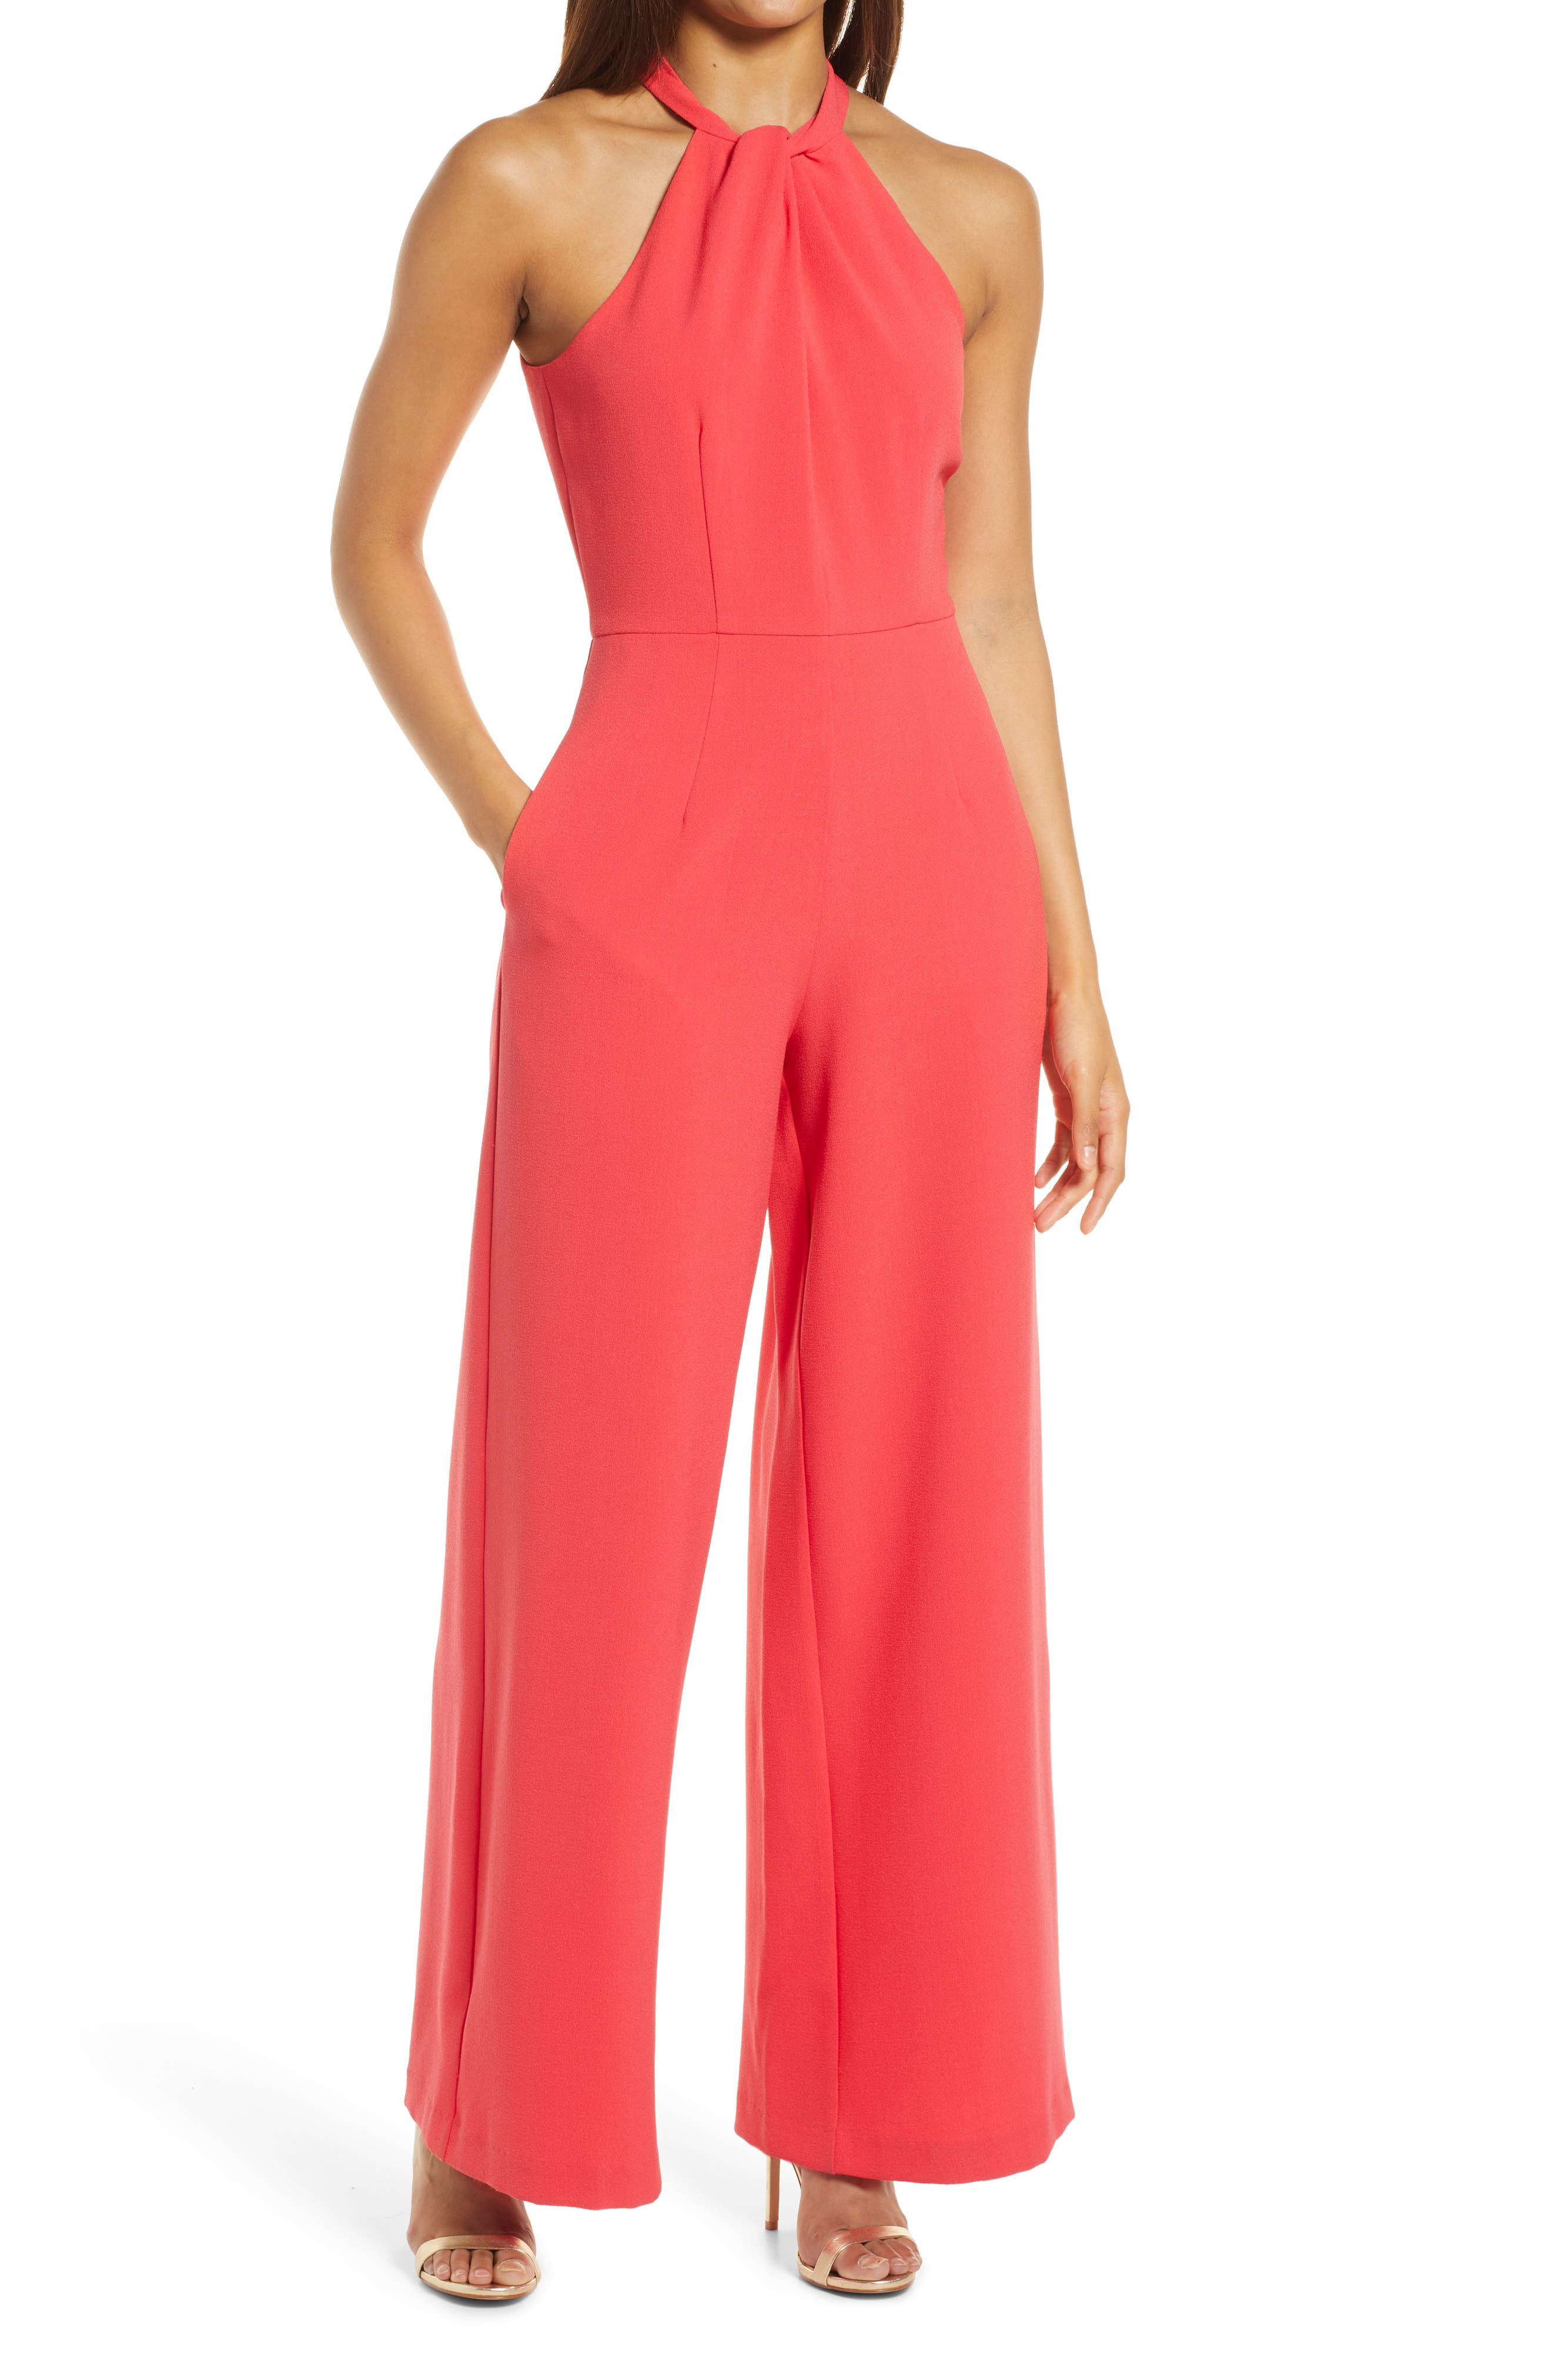 Womens Pleated Wrap Over Jumpsuit Ladies Evening Party Cocktail Romper Playsuit 